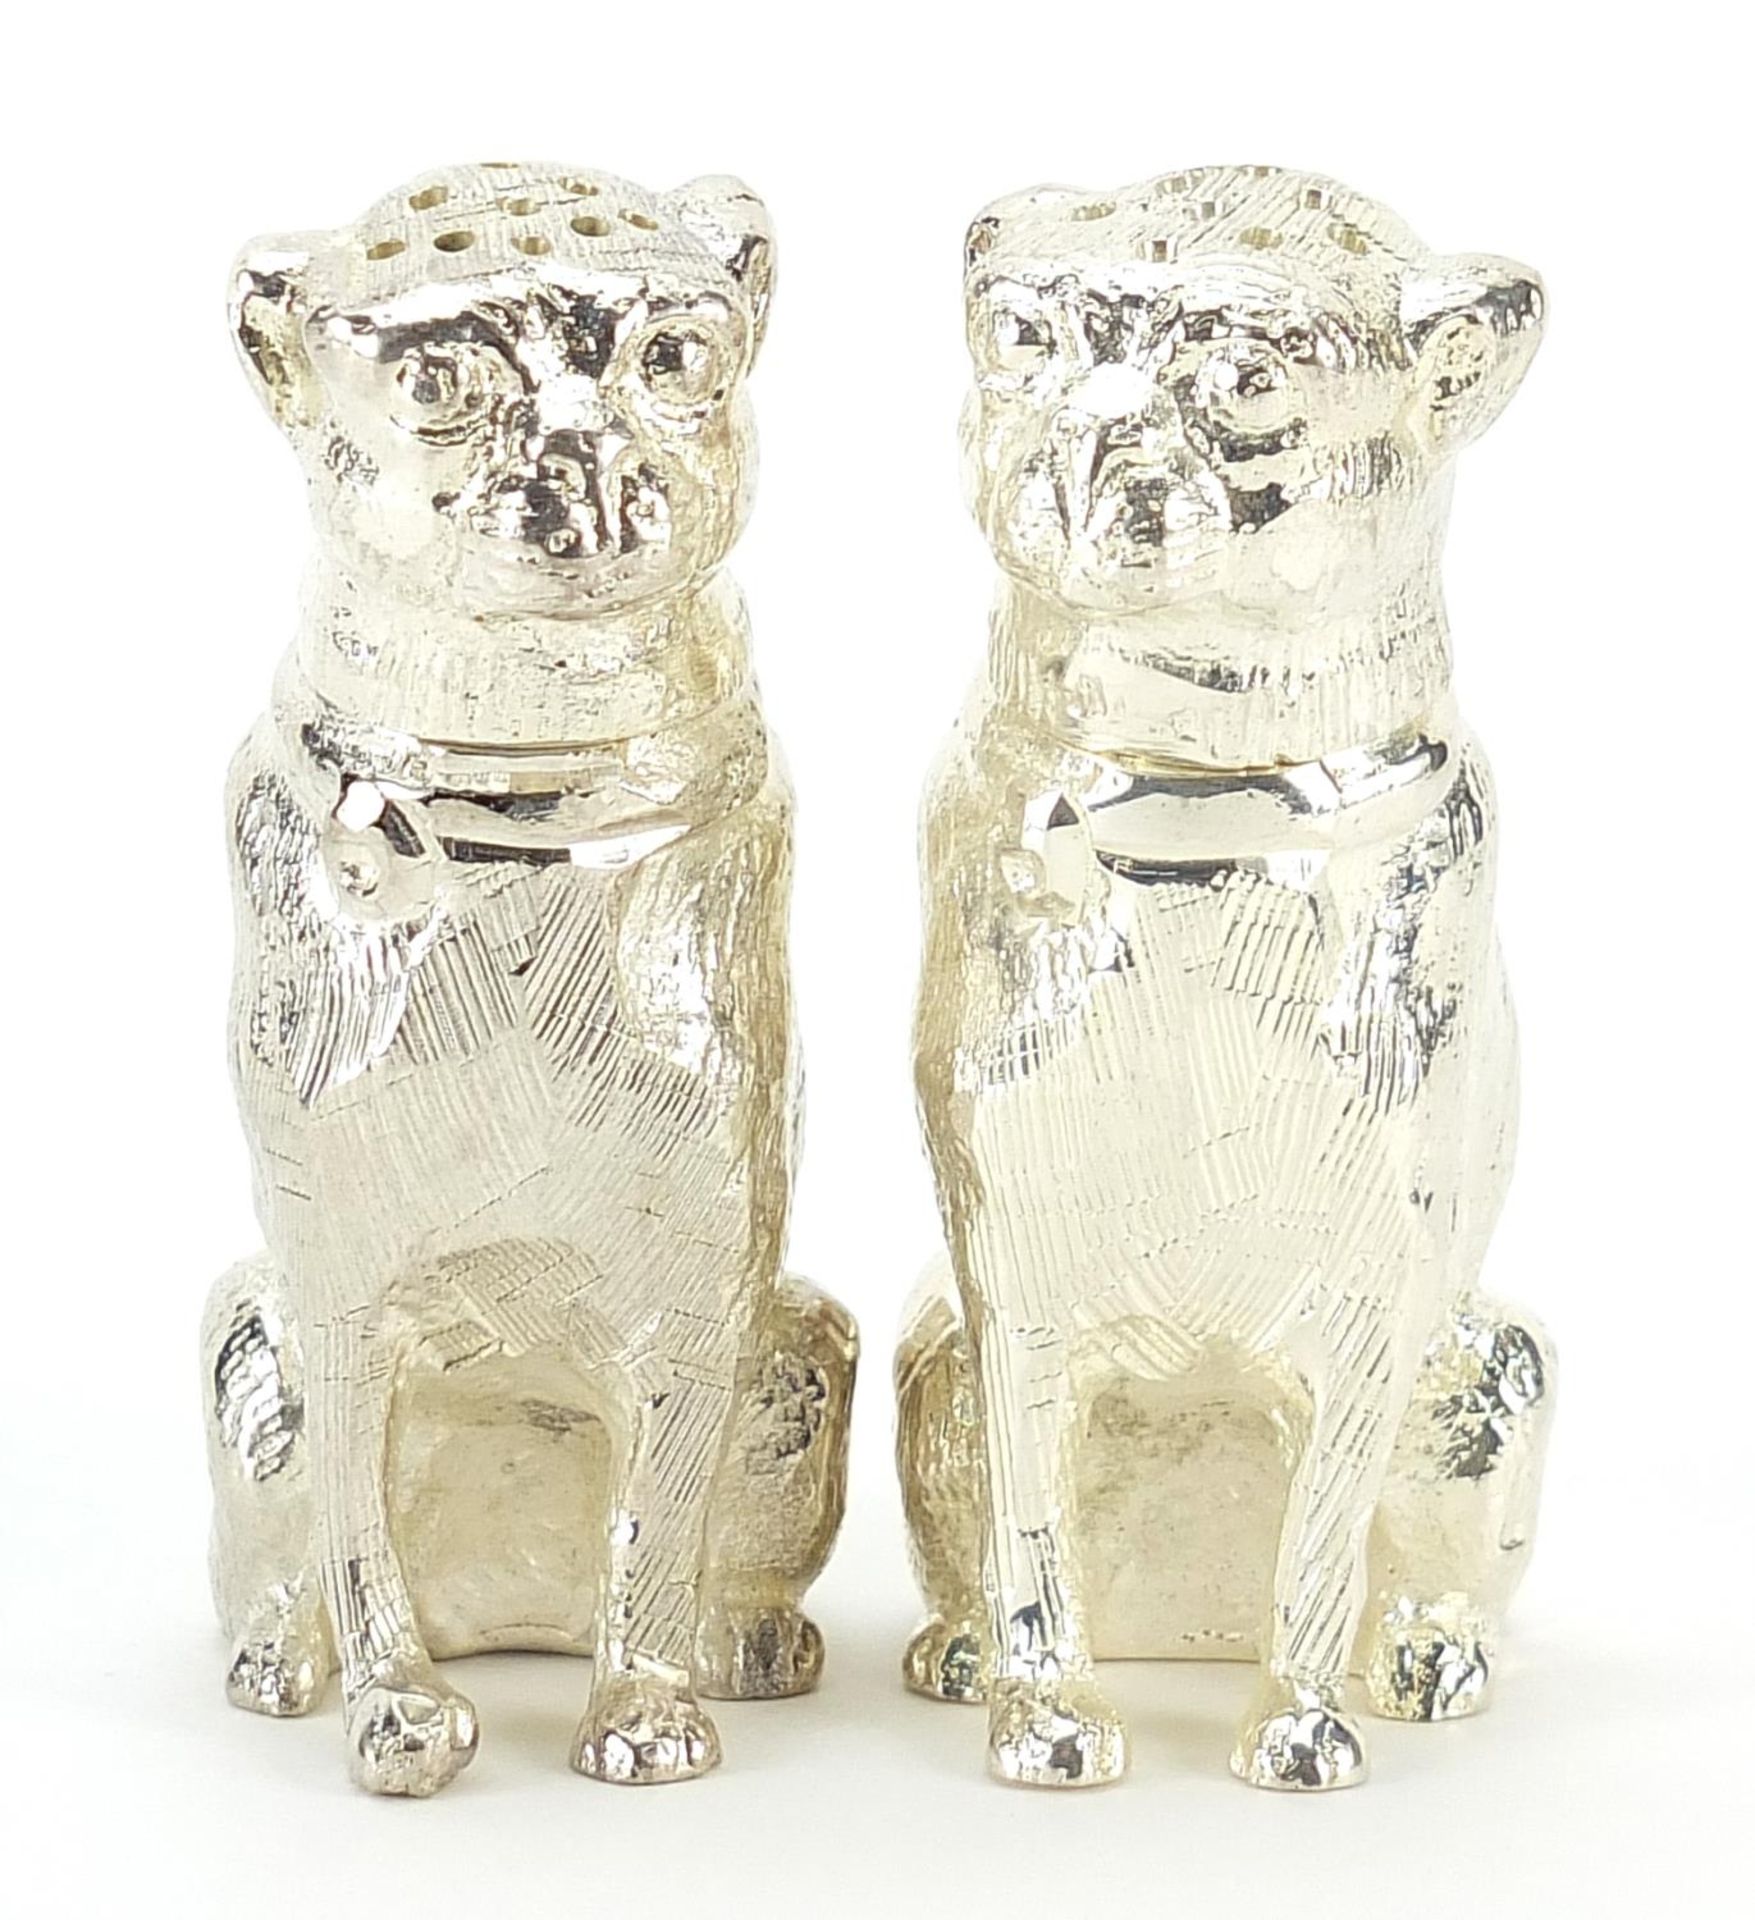 Pair of silver plated dog design pepperettes, each 6.5cm high